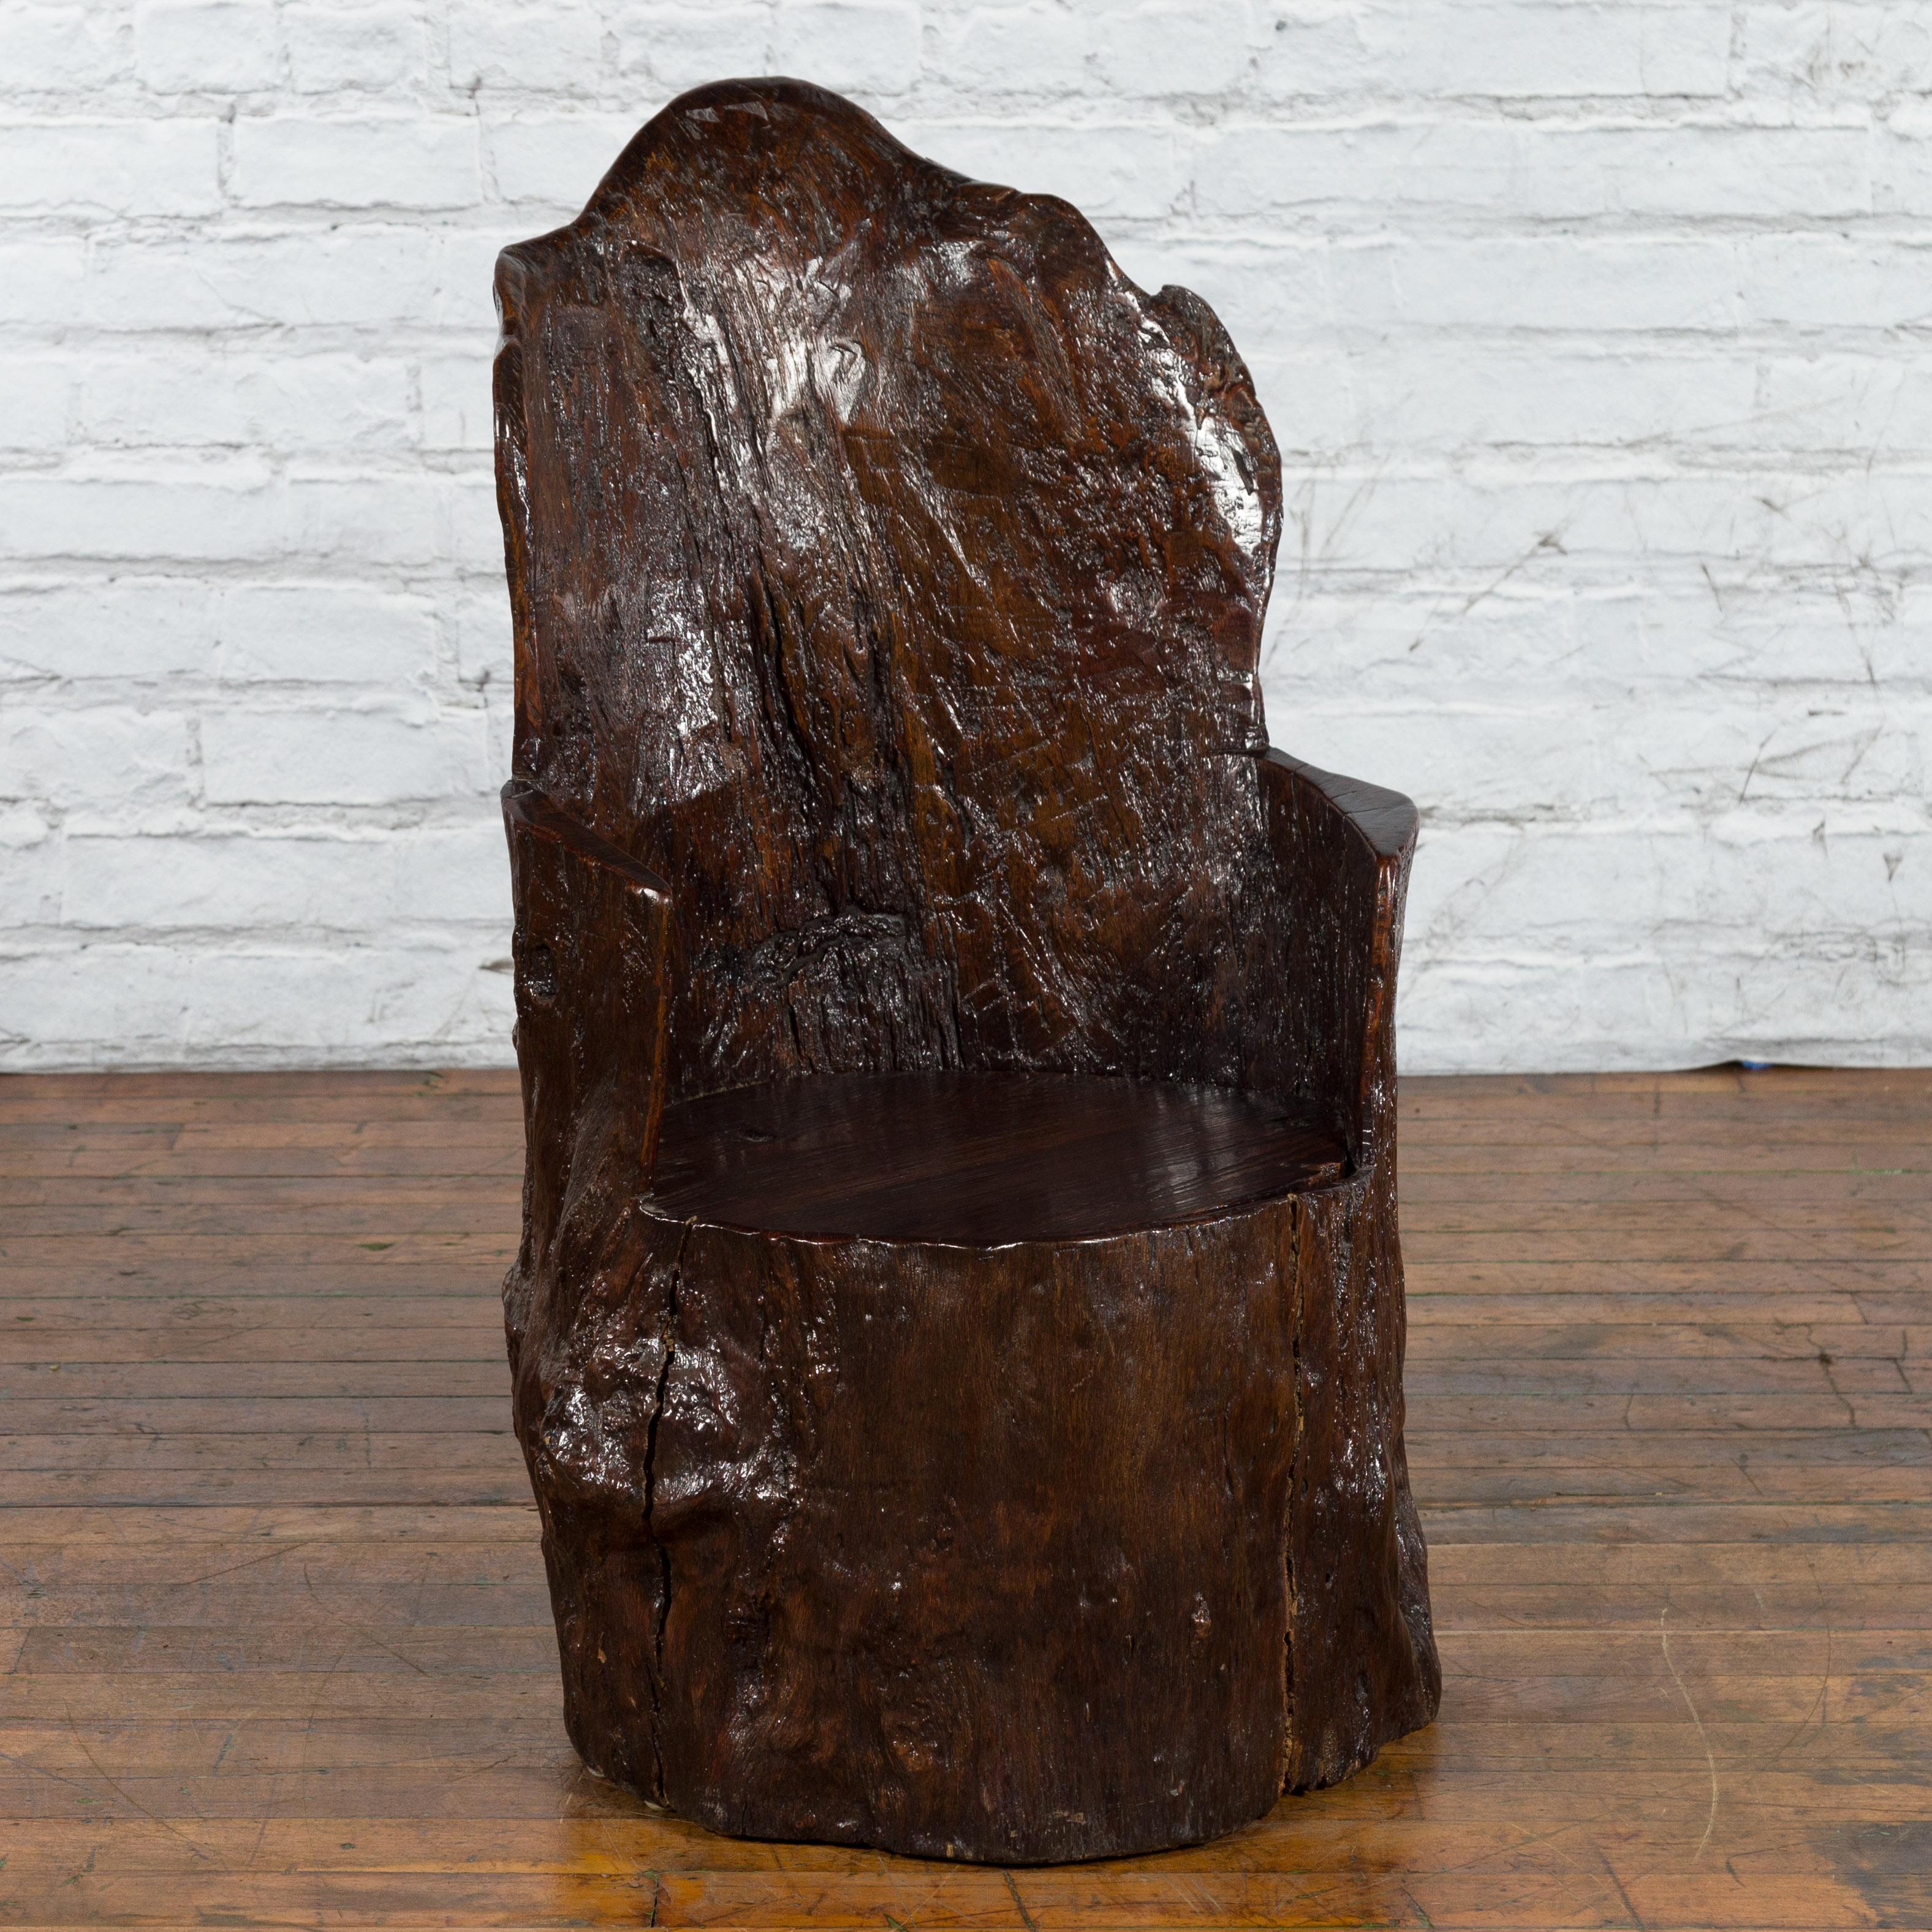 A rustic Chinese Cantonese hand-crafted seat made from a tree trunk from the early 20th century with curving back, brown patina and hidden compartment under the seat. Created in the Southern region of Canton (nowadays known as Guangzhou) in the